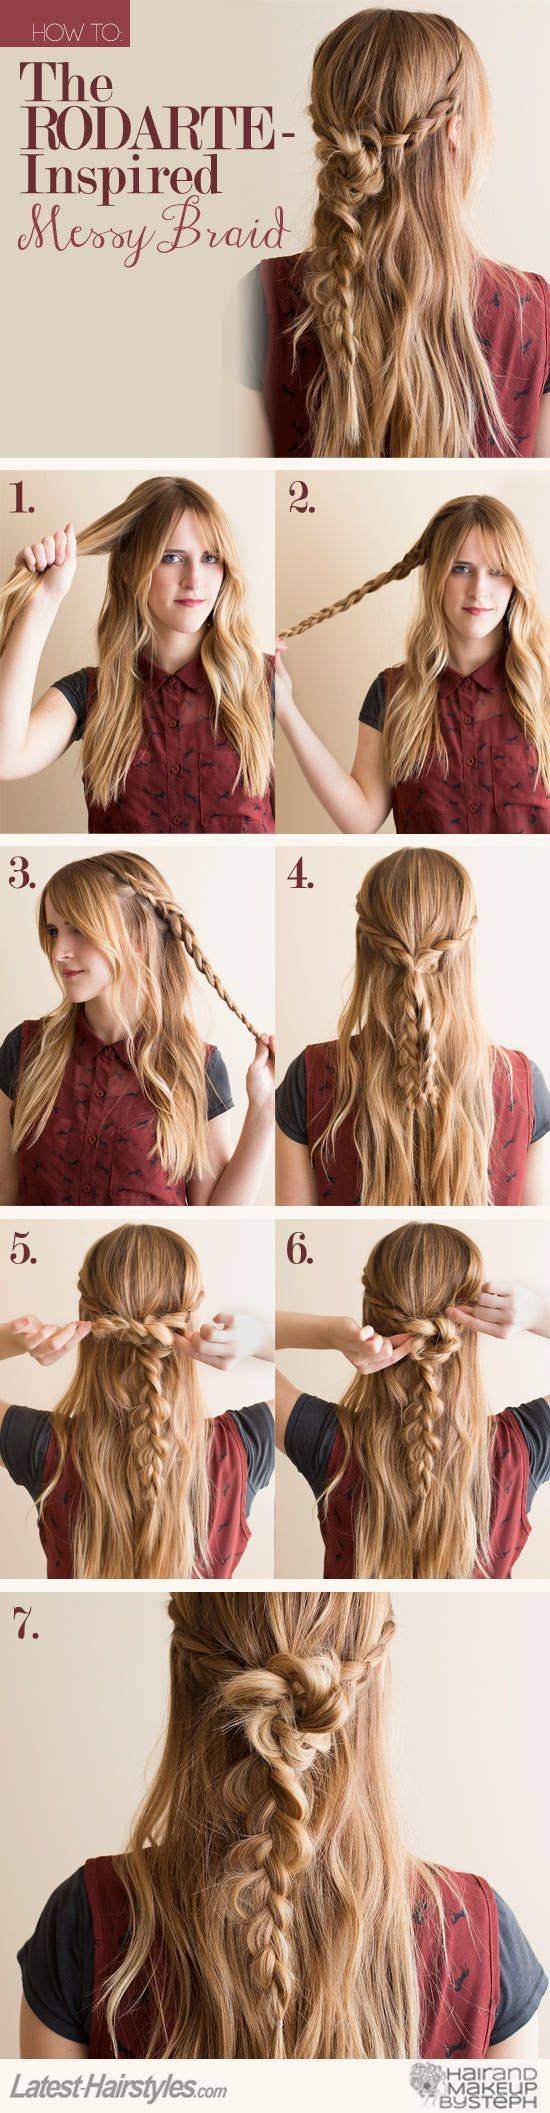 https://image.sistacafe.com/images/uploads/content_image/image/47609/1445010964-18-30-Messy-Braid-Hairstyles-That-You-Will-Love.jpg